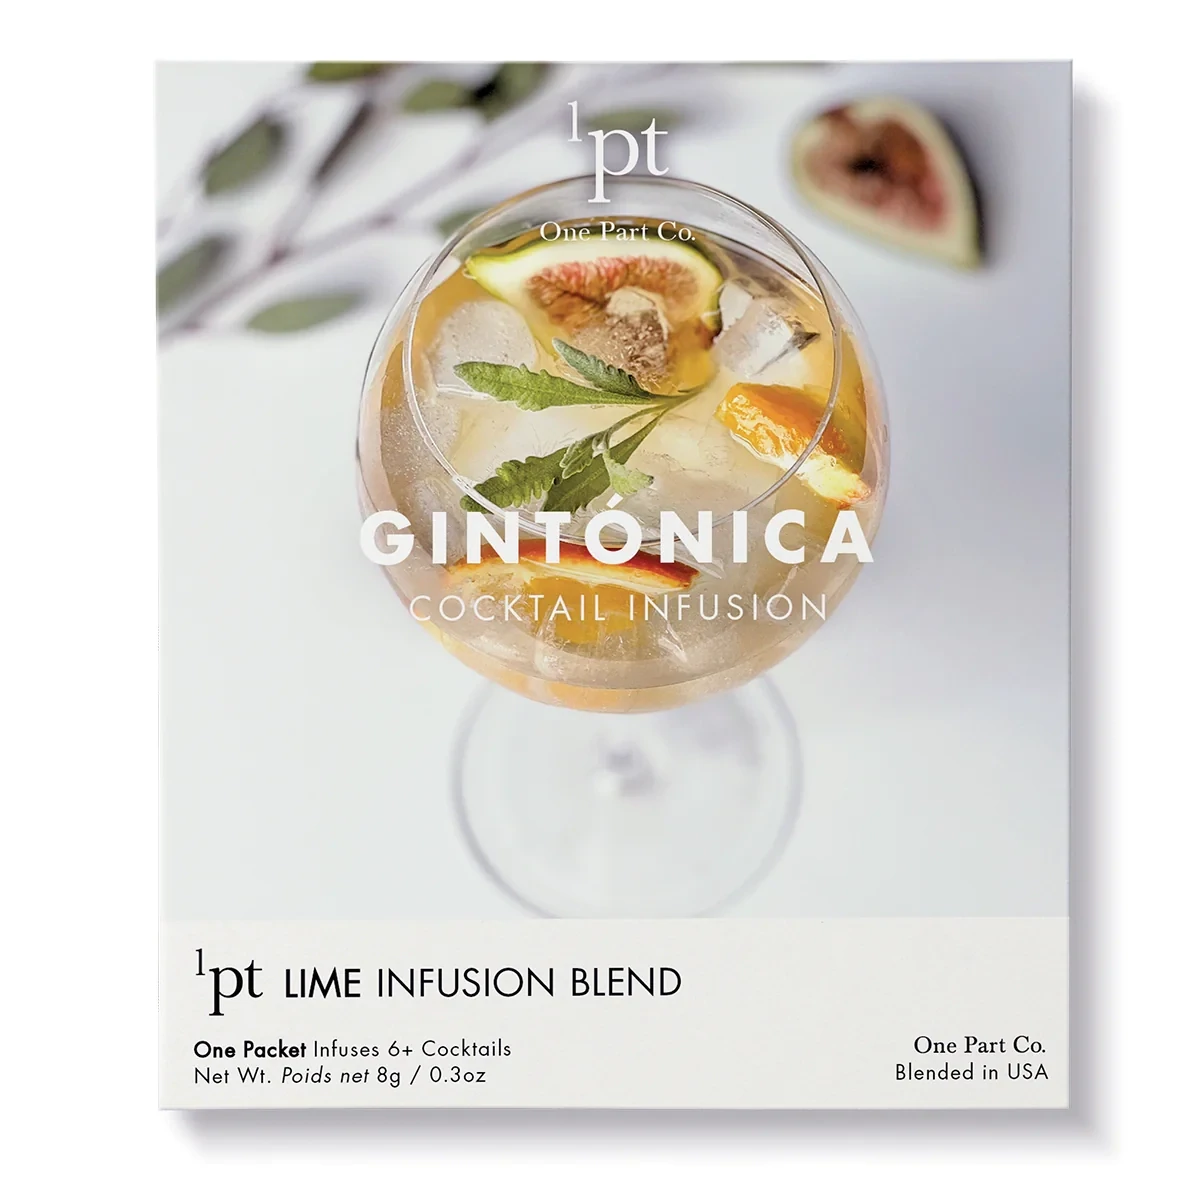 Gintonica Cocktail